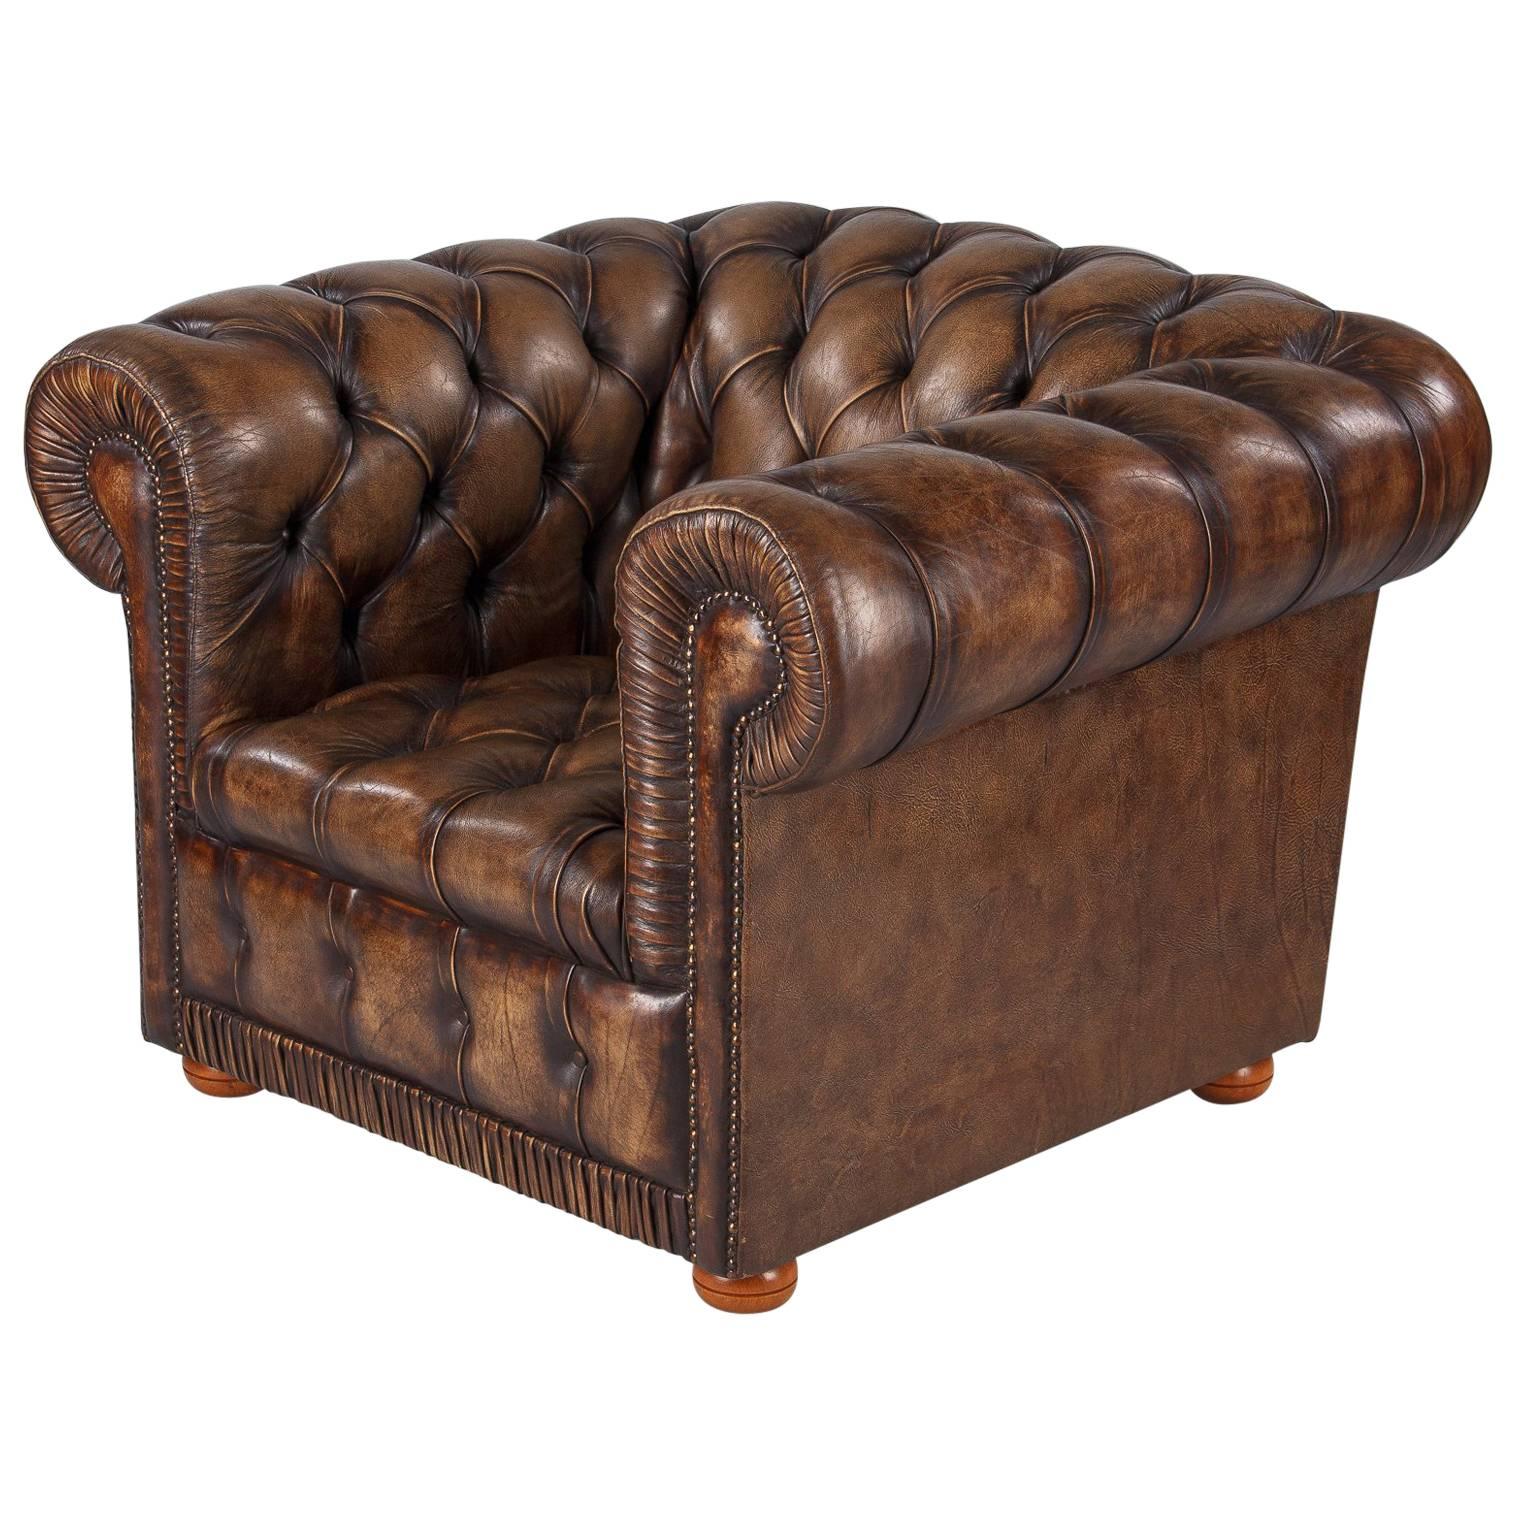 Vintage English Chesterfield Armchair in Brown Leather, 1960s For Sale